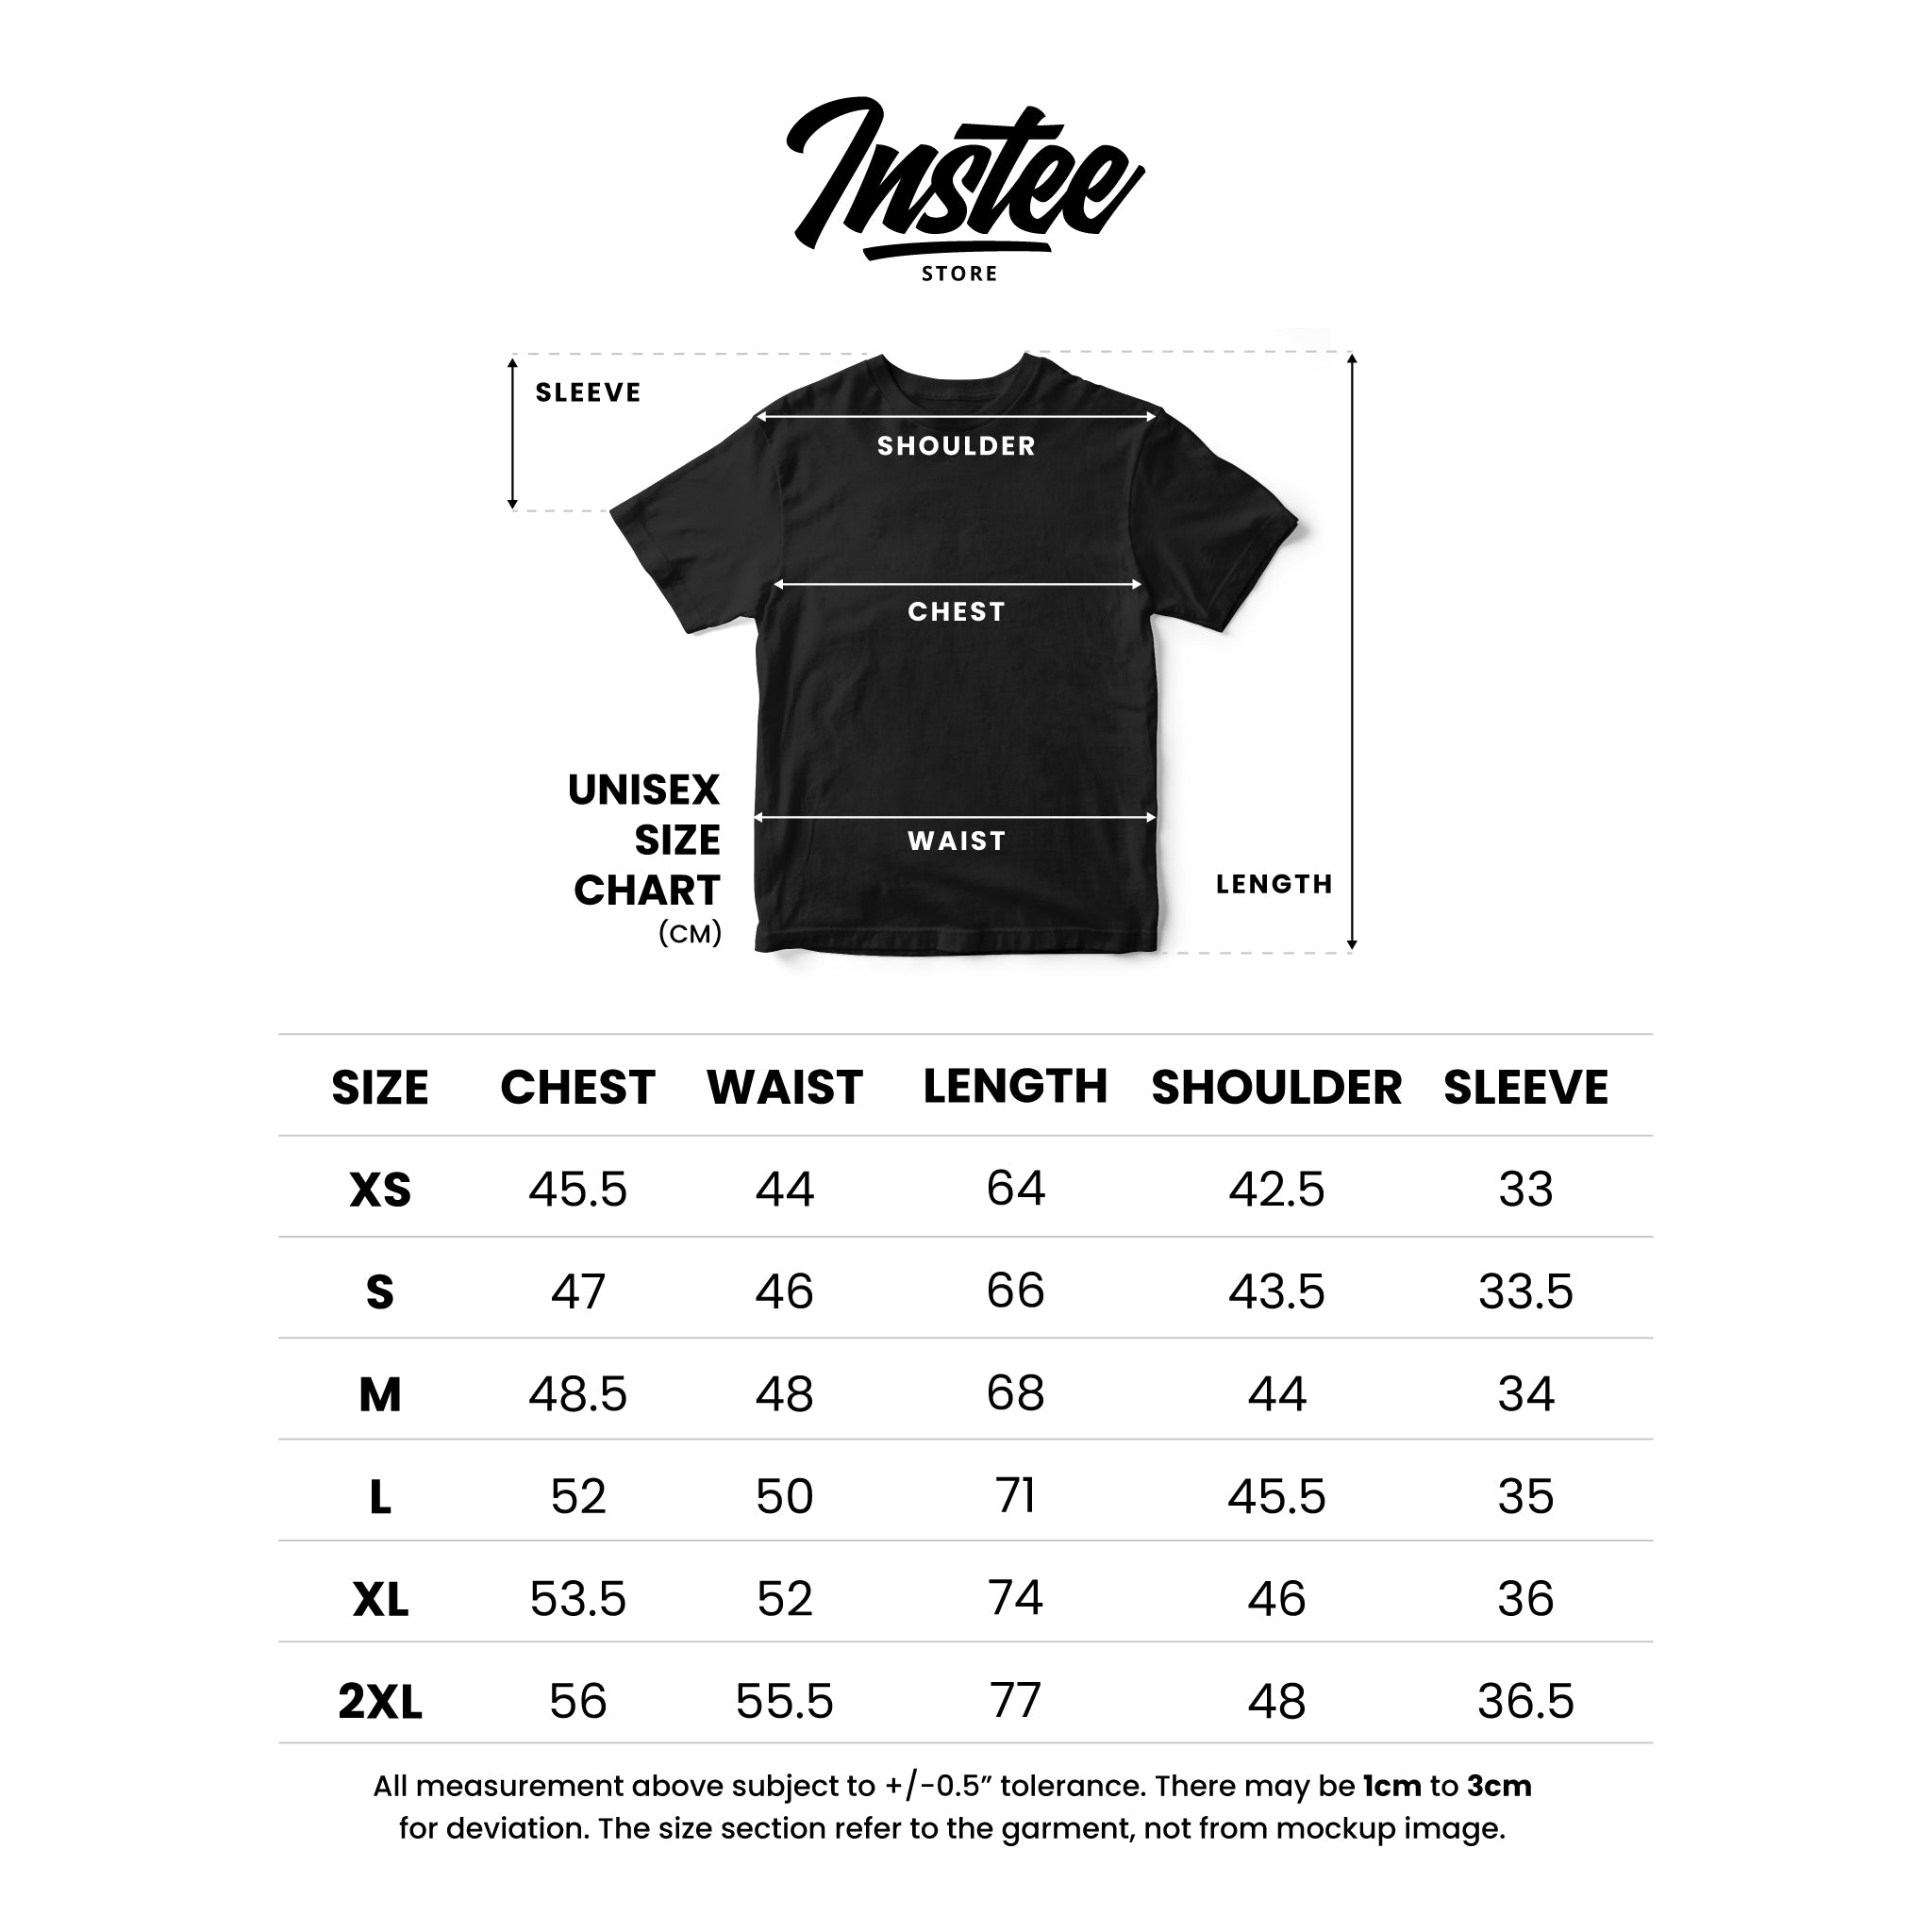 Instee Physical Distancing T-shirt Unisex 100% Cotton